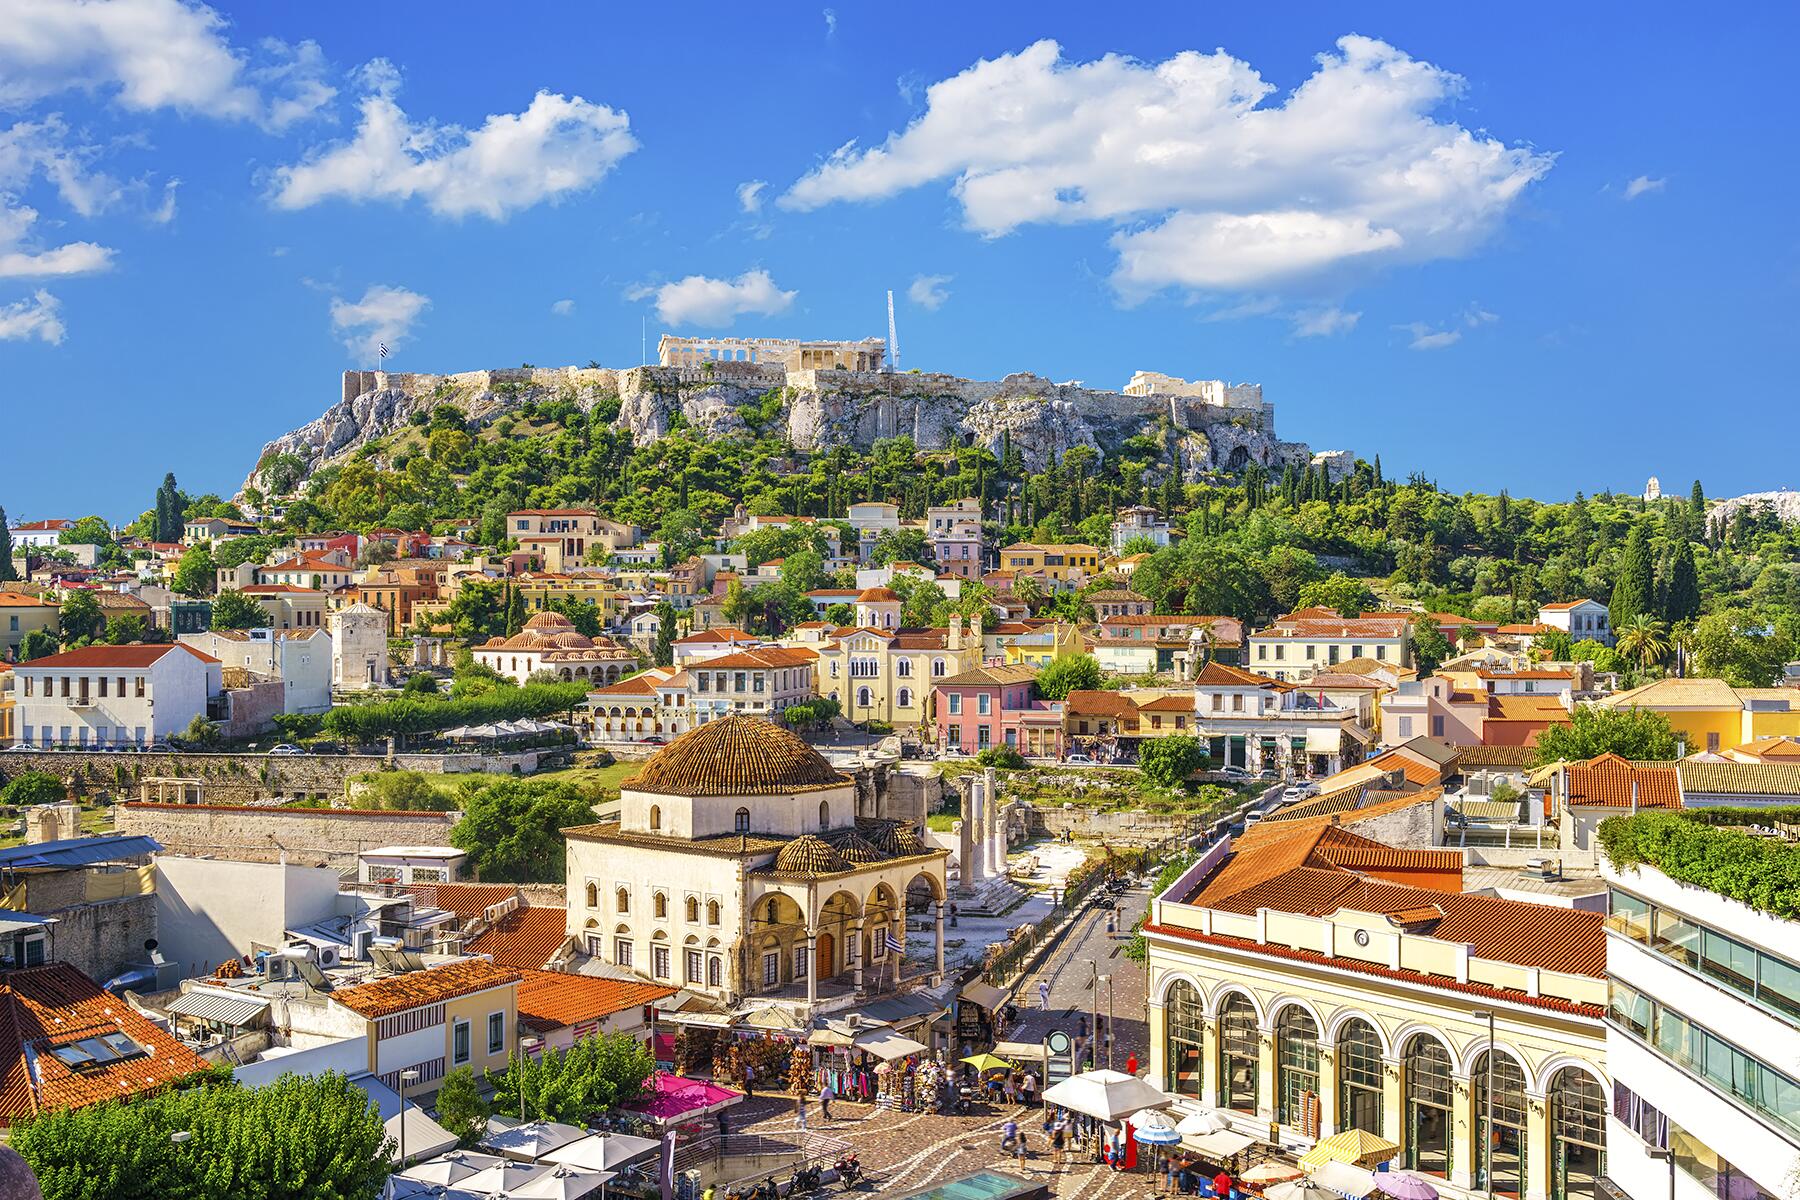 <a href='https://www.fodors.com/world/europe/greece/athens/experiences/news/photos/best-neighborhoods-to-visit-in-athens-greece#'>From &quot;The 10 Best Neighborhoods to Visit on Your First Trip to Athens&quot;</a>